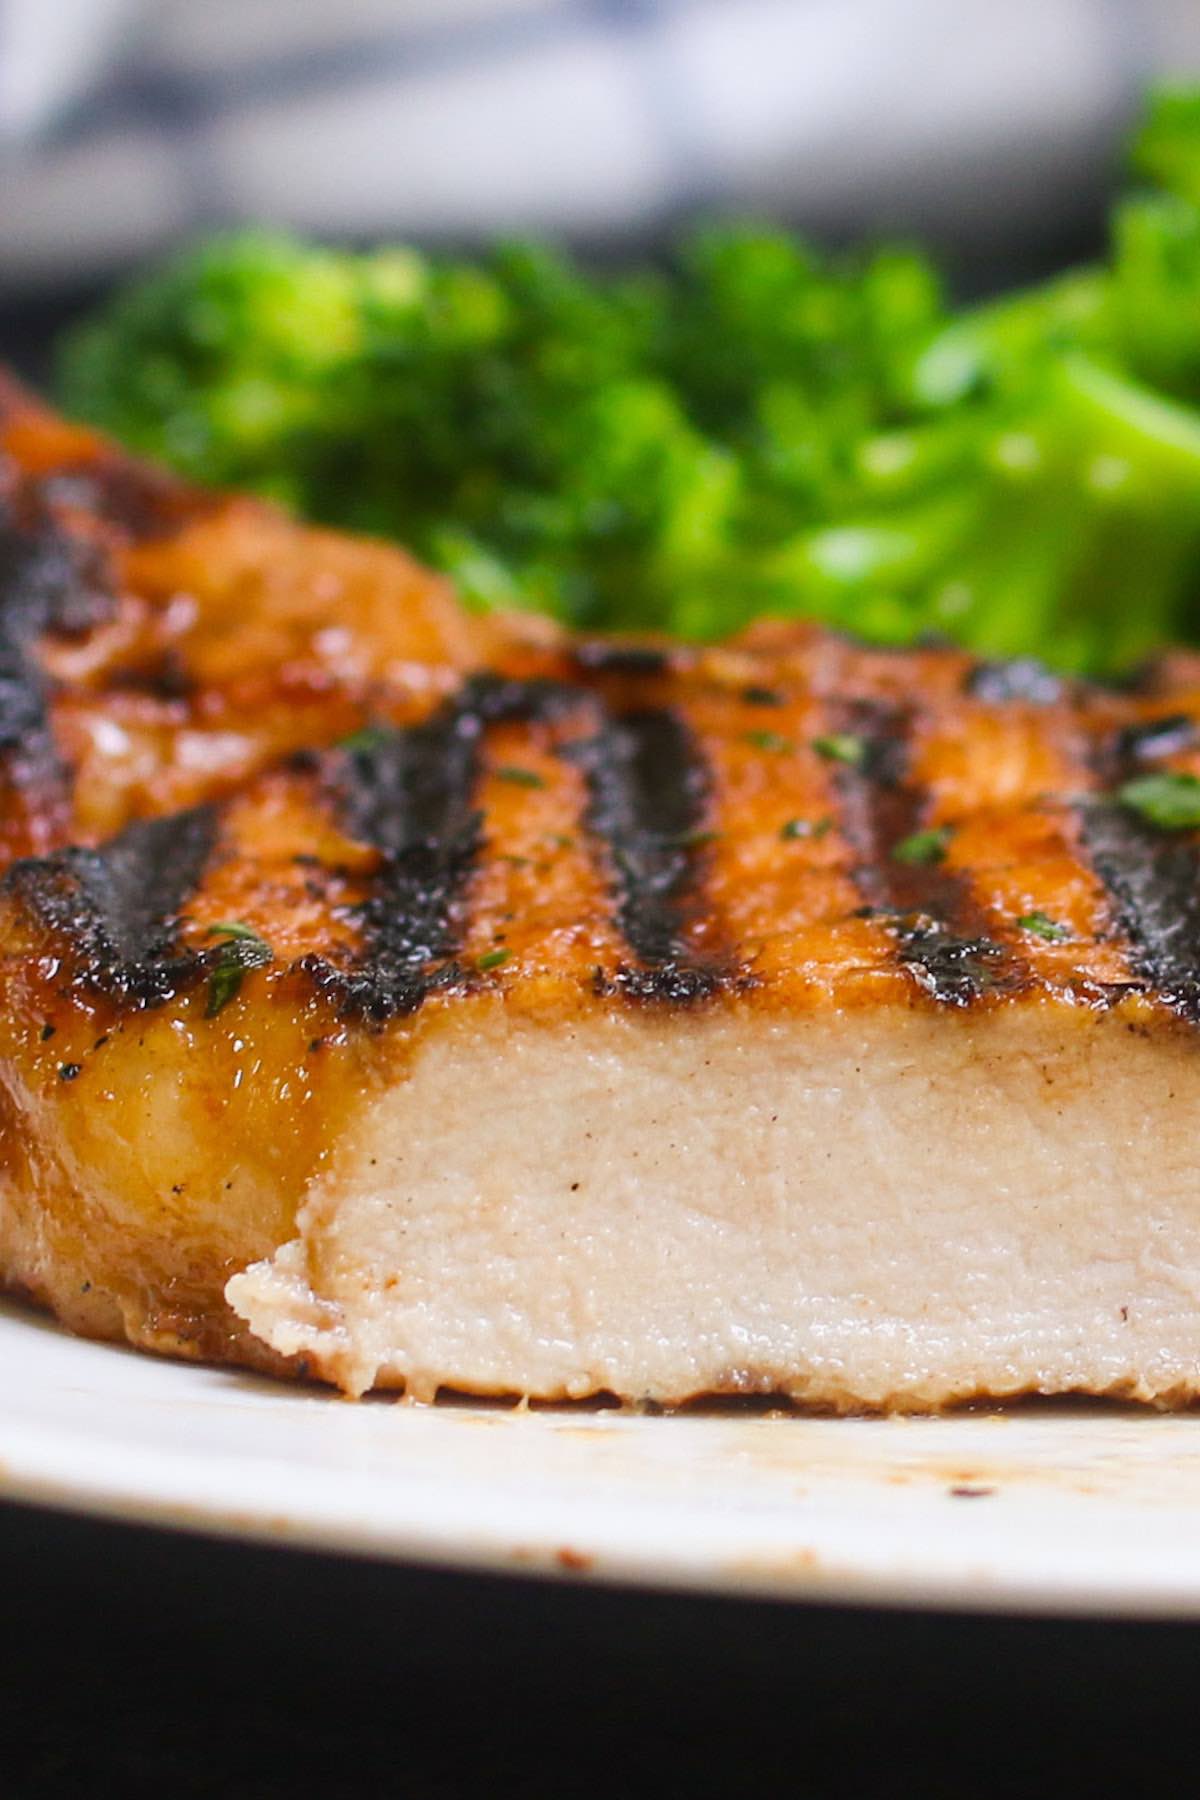 Whether you prefer your pork chops grilled, baked, or fried, there are tips and tricks you can use to ensure they’re tender and juicy. Learn the proper pork chop internal temperature so that they’re delicious and safe to eat every time.